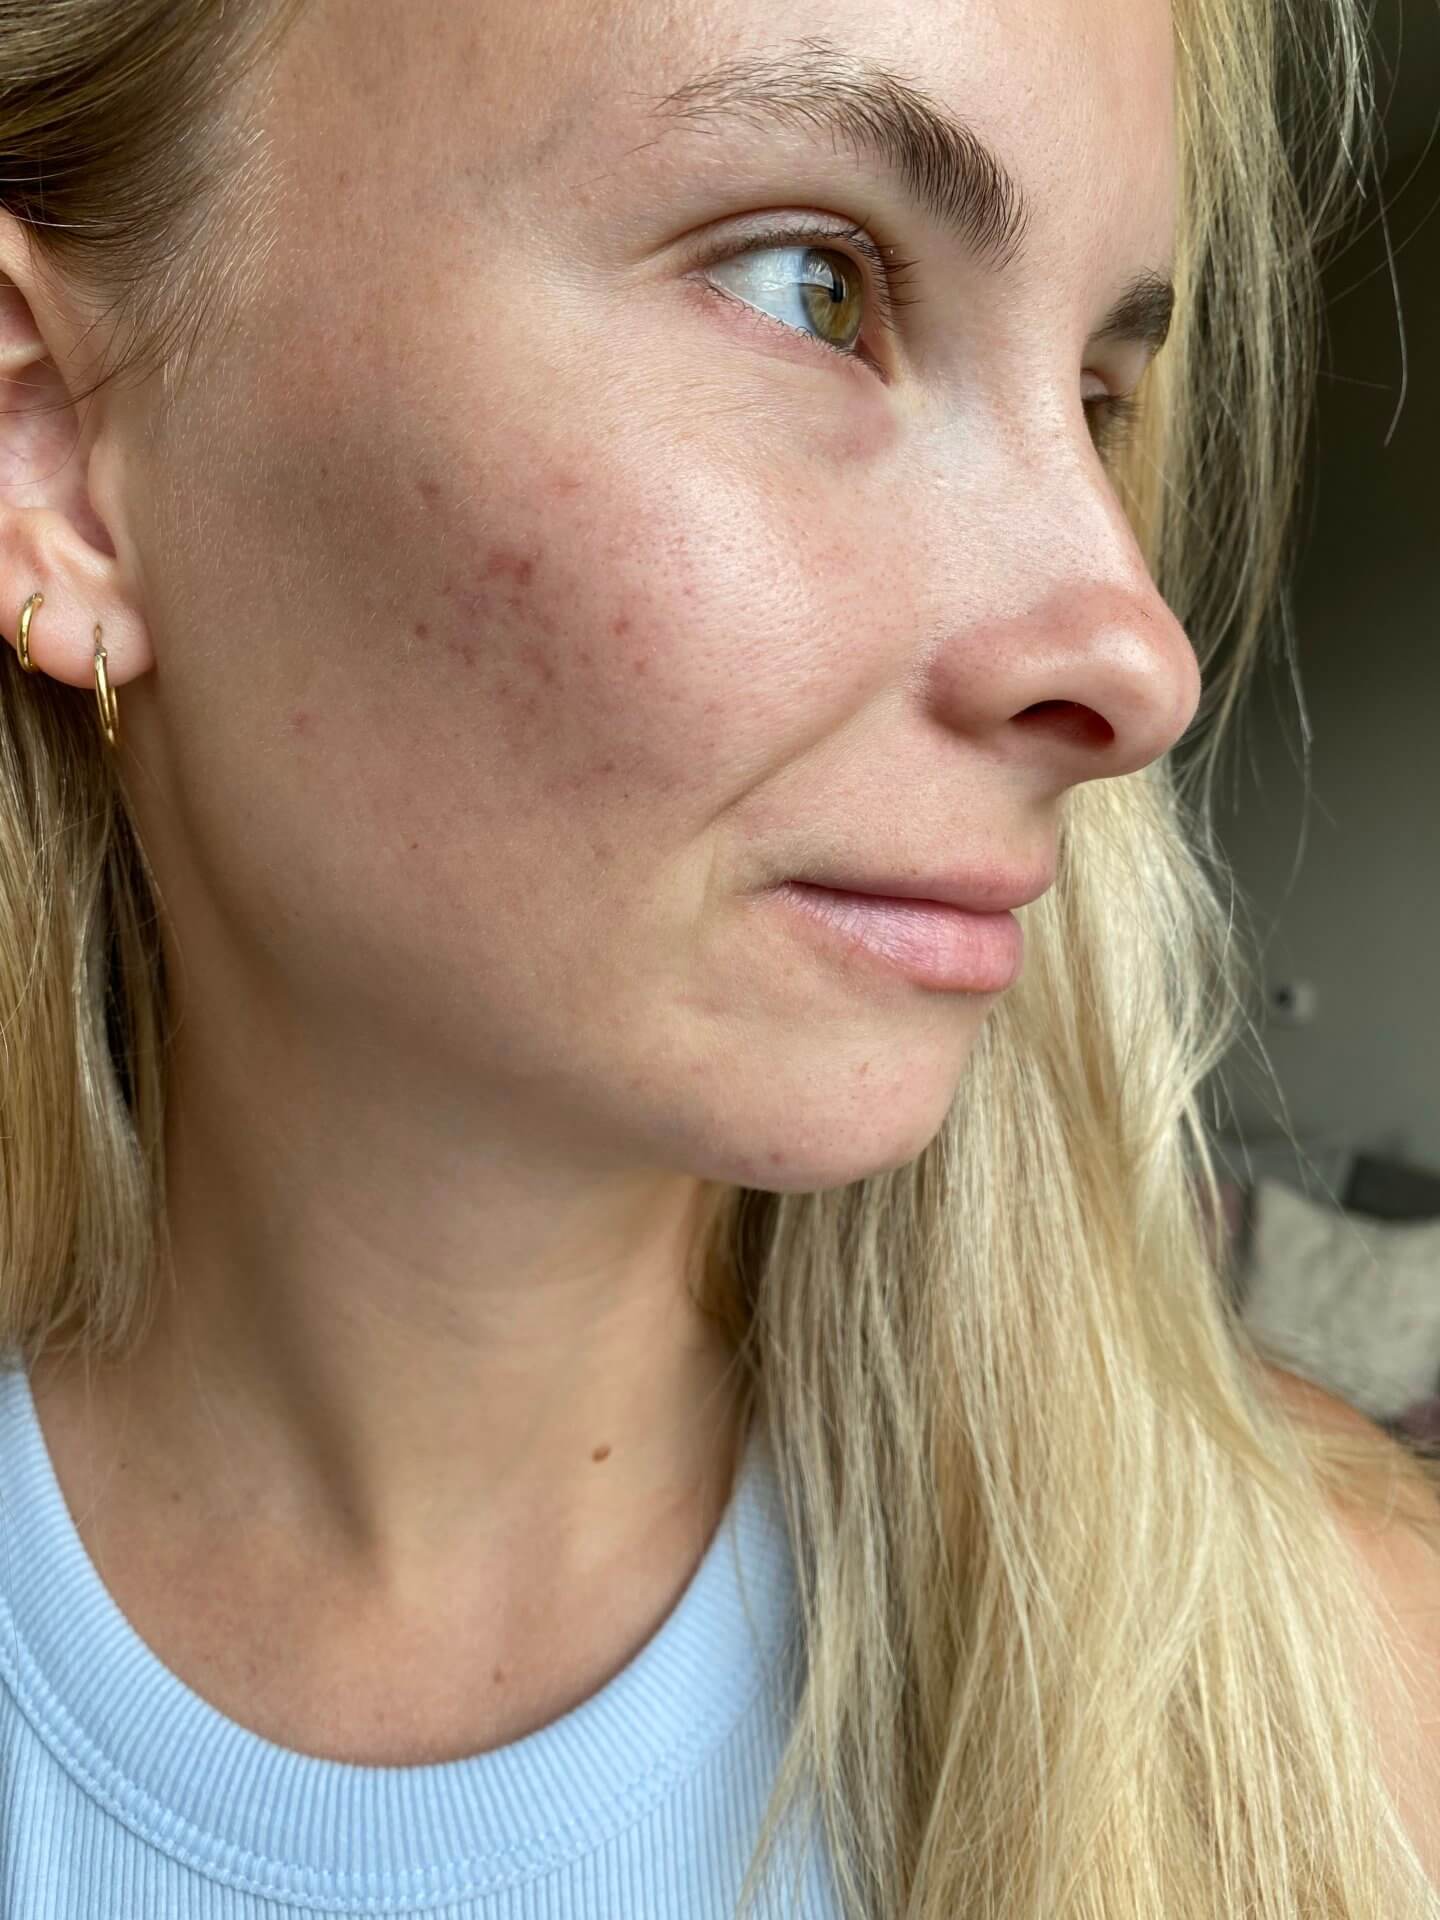 Clear Skin Routine. How I cleared up my skin. Skincare products for acne and acne scarring. Healthy healing skin care routine. The Blonder Life